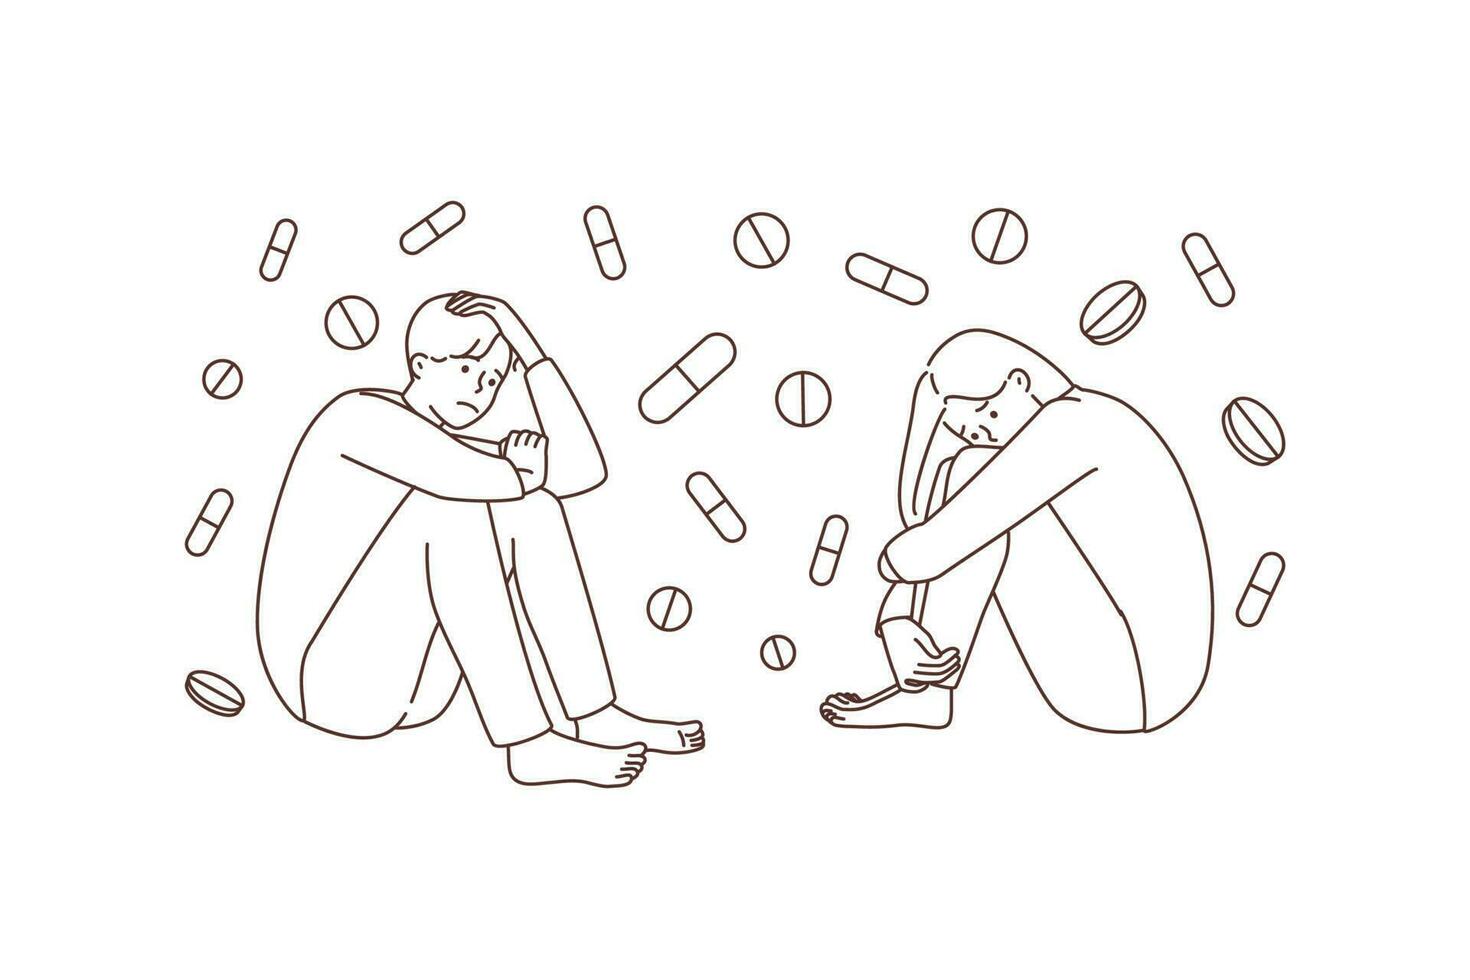 Depressed people suffer from medication dependence. Unhappy patients struggle with pharmaceutical problems. Medicine and healthcare. Vector illustration.